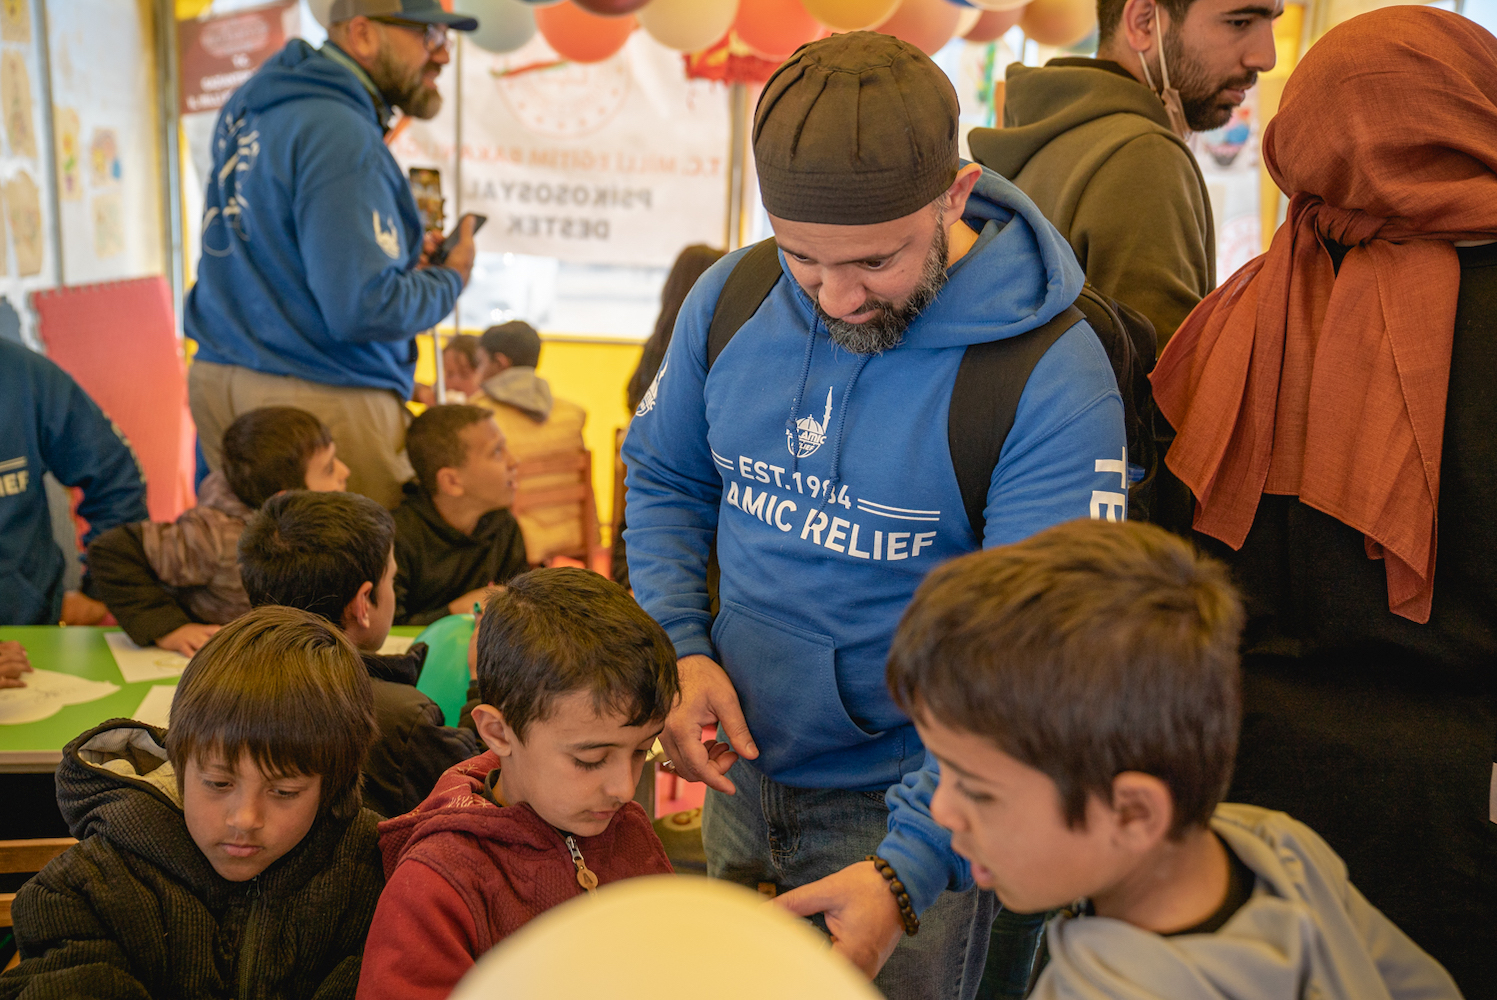 A person wearing a blue hoodie with white text “E.S.T. nineteen eighty-four” and “Islamic Relief” on the front stands among a group of children.